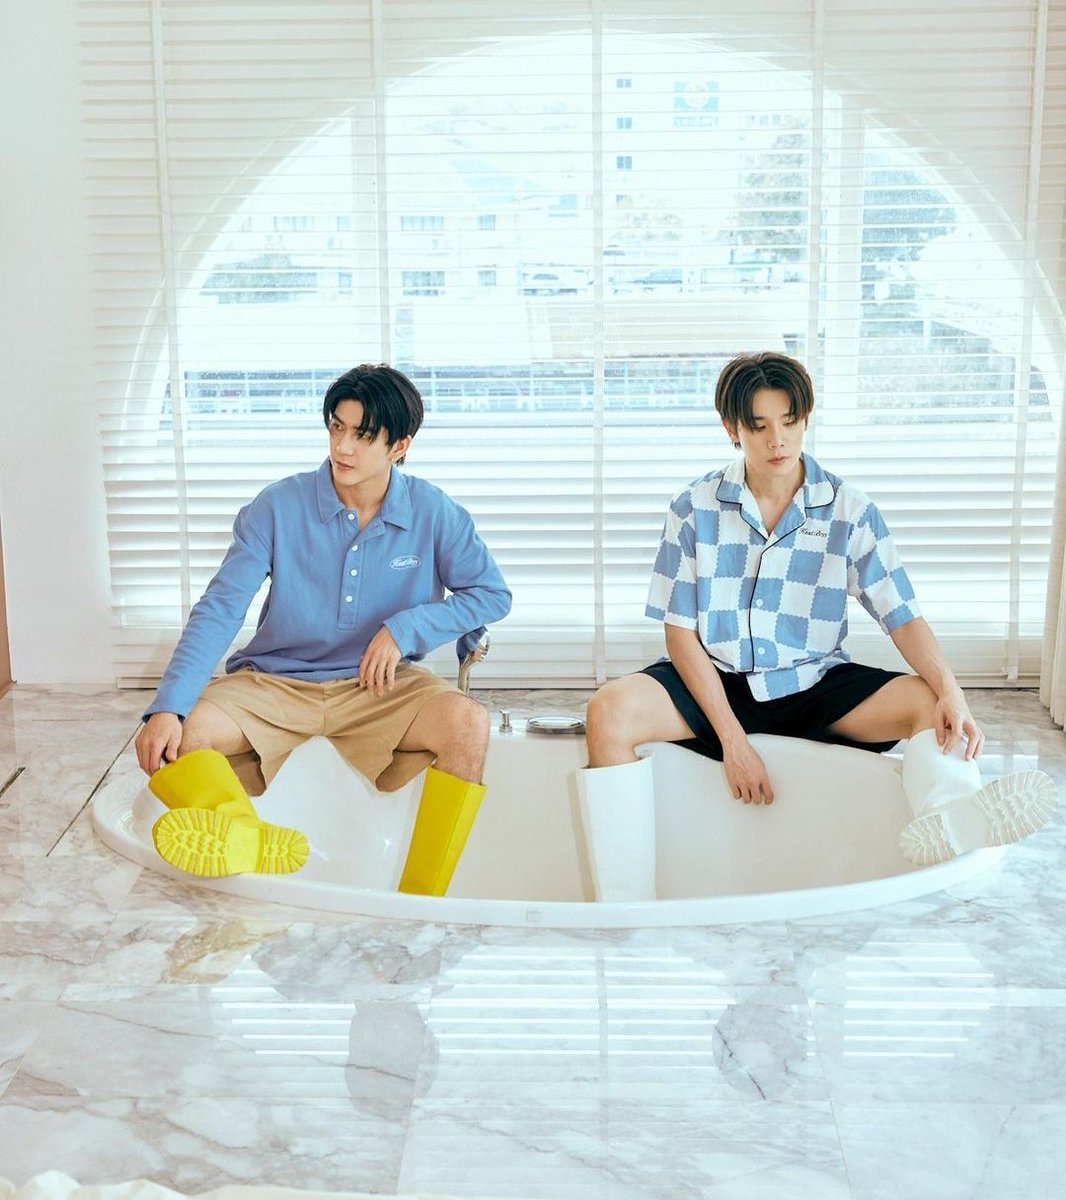 ourskyy2 puentalay yes i see them because of the bathtub 😭